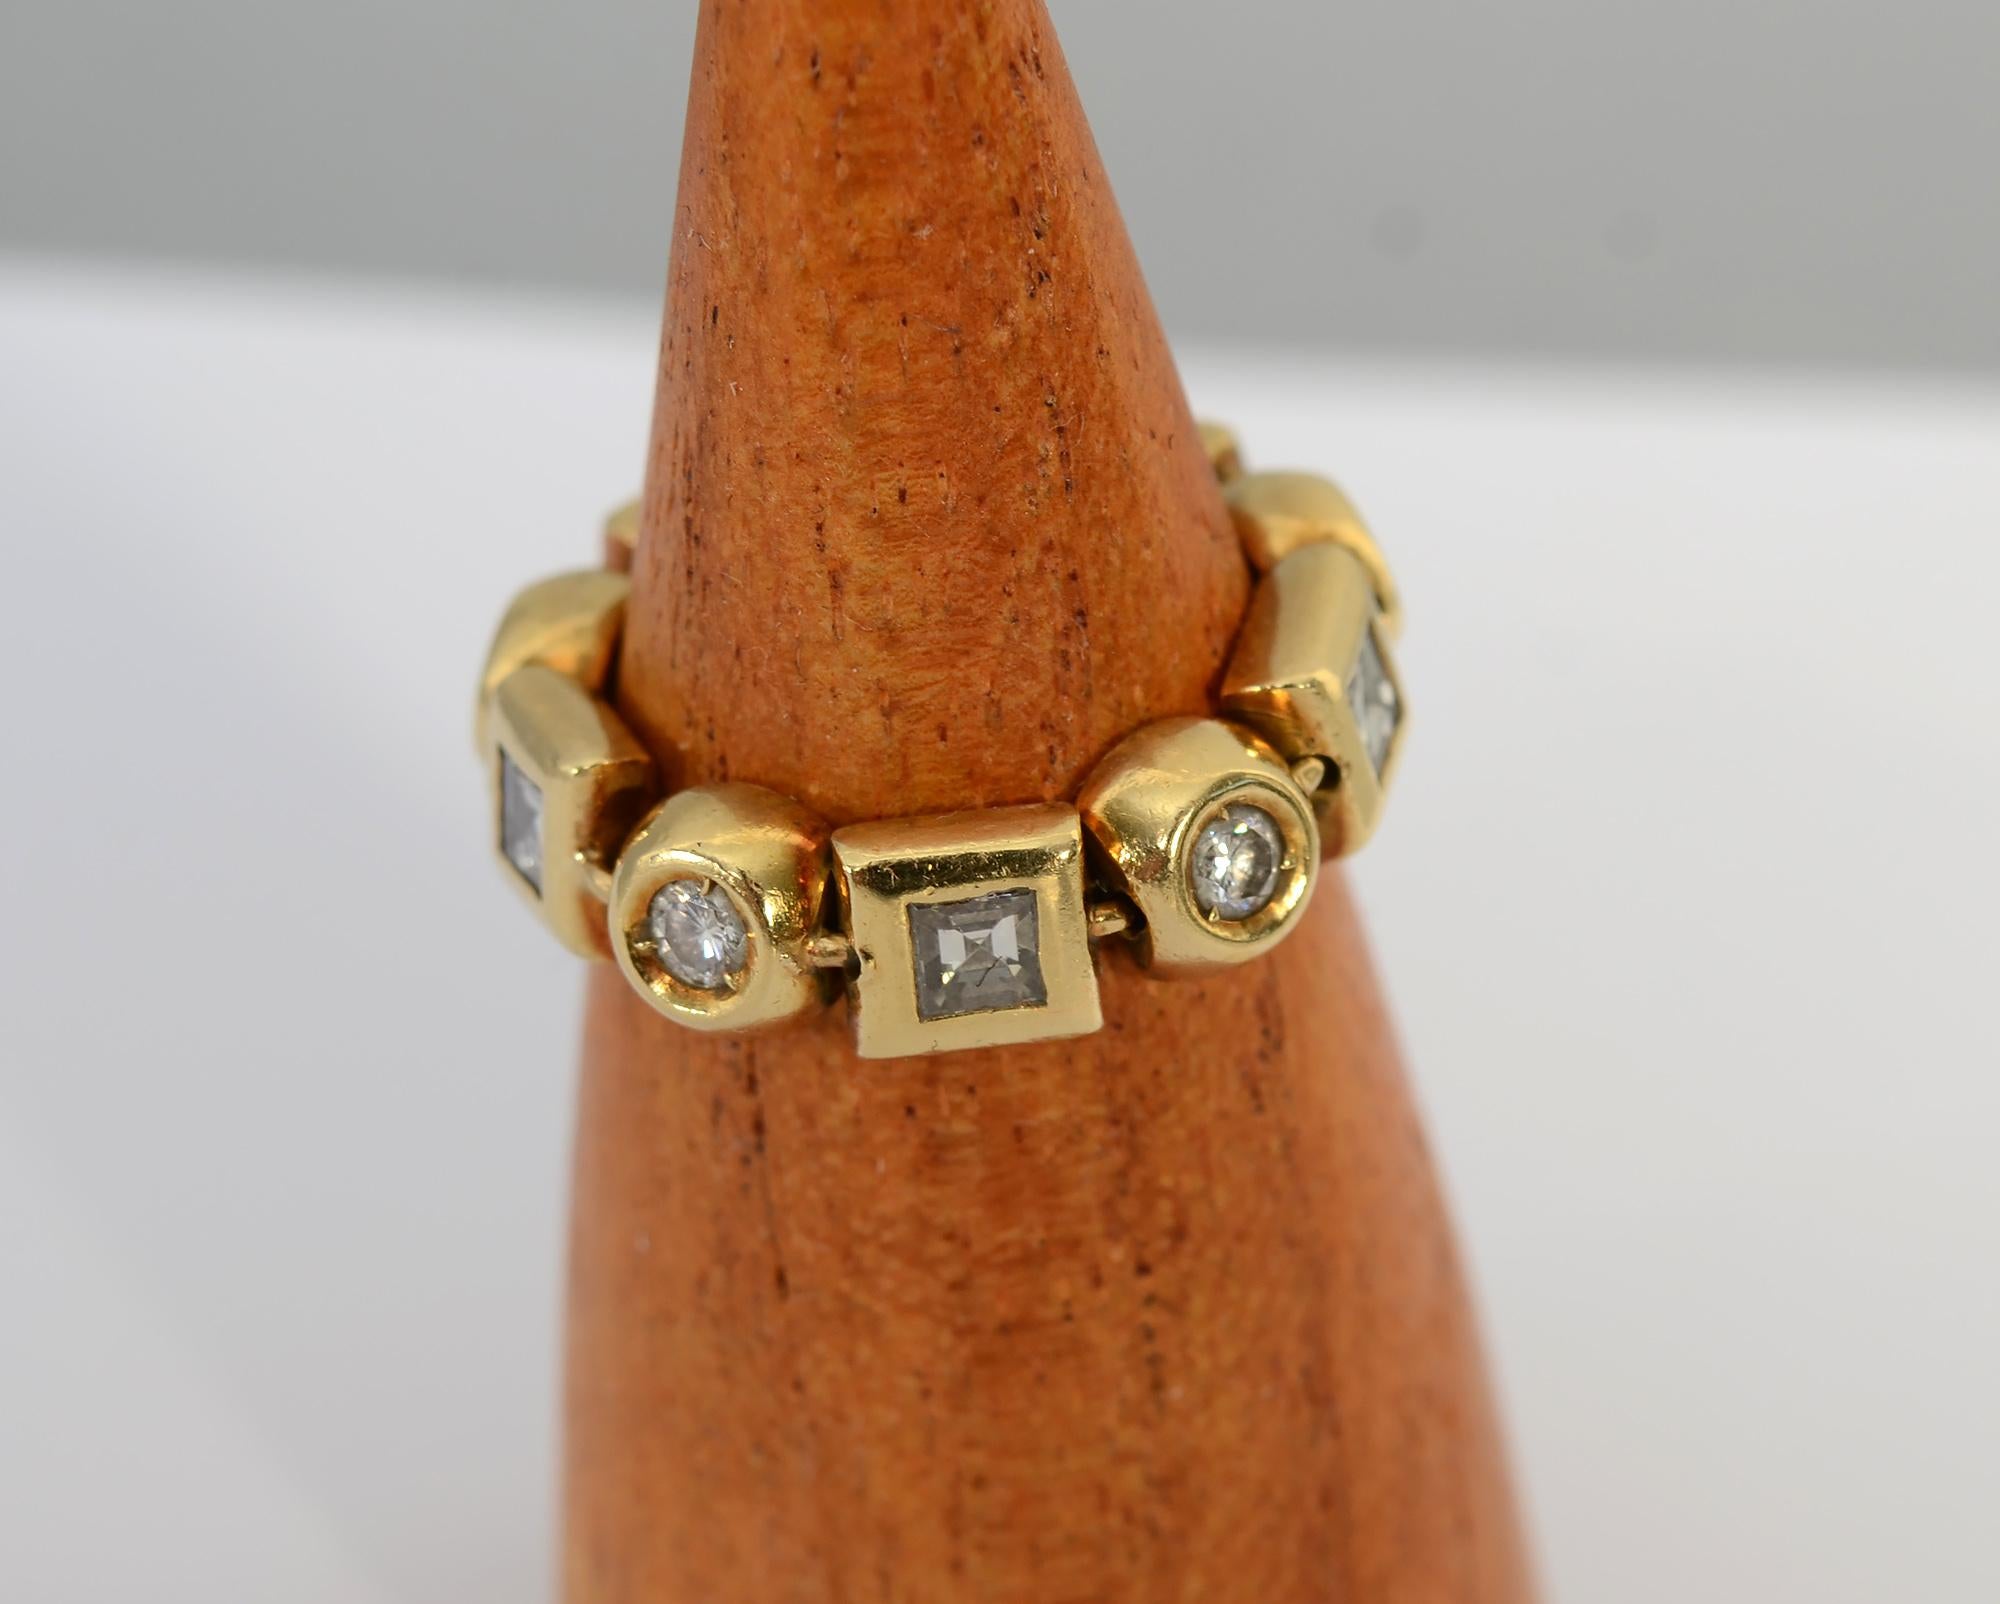 Eighteen karat gold band ring with alternating round and square diamonds. The ten stones weigh a total of approximately 1 carat. The alternating jeweled links are joined with oval connectors making the ring totally flexible. It is size 6. The ring